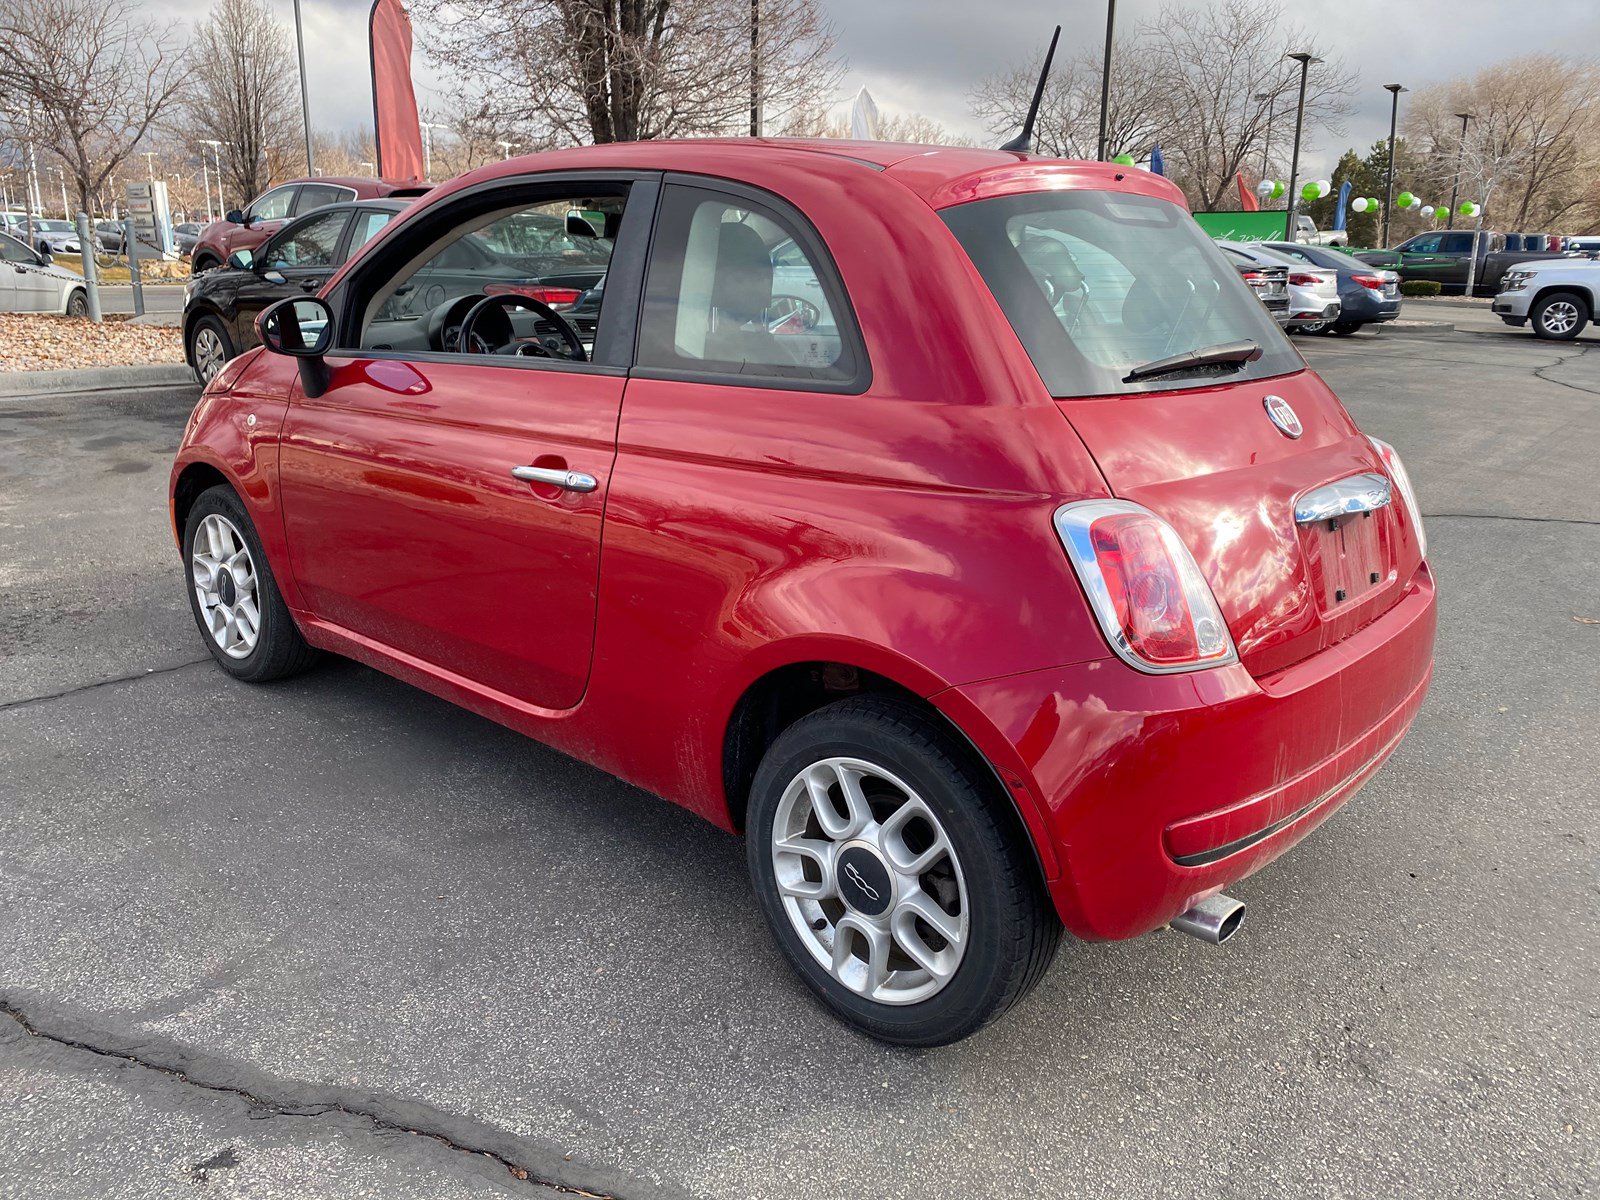 PreOwned 2013 FIAT 500 Pop Hatchback in Murray TVS0009A